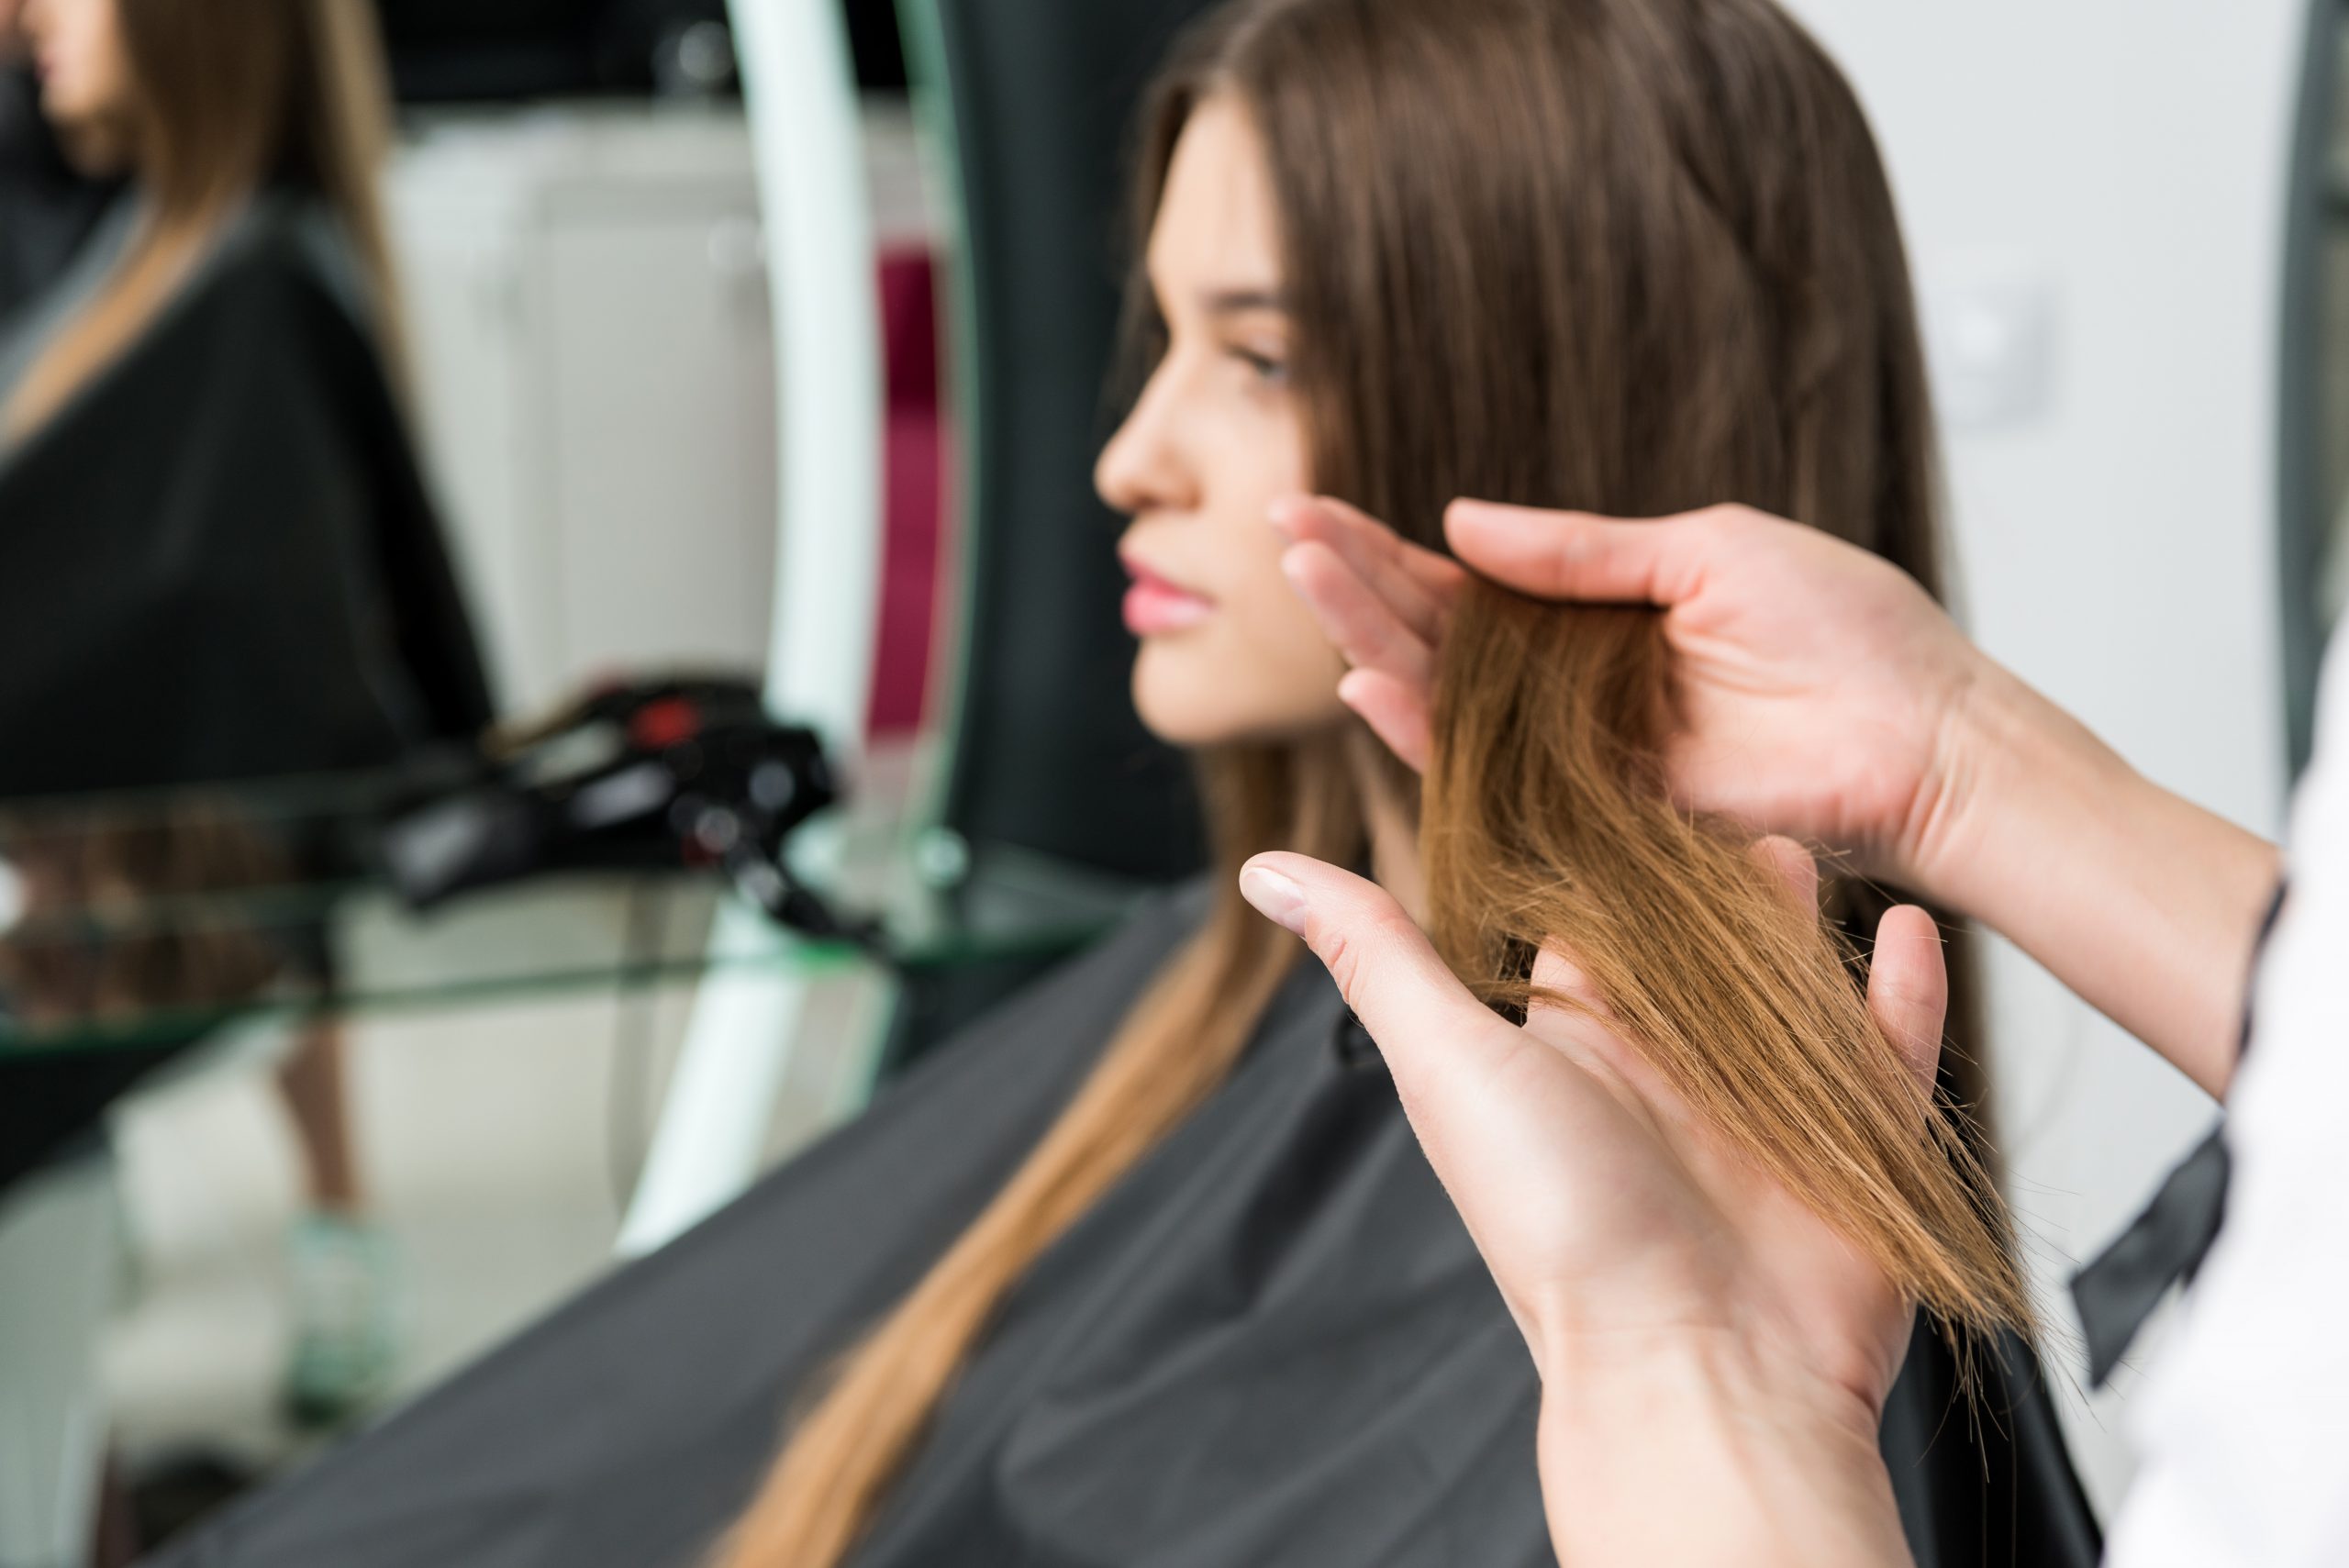 The Complete Guide on How and Where to Donate Your Hair